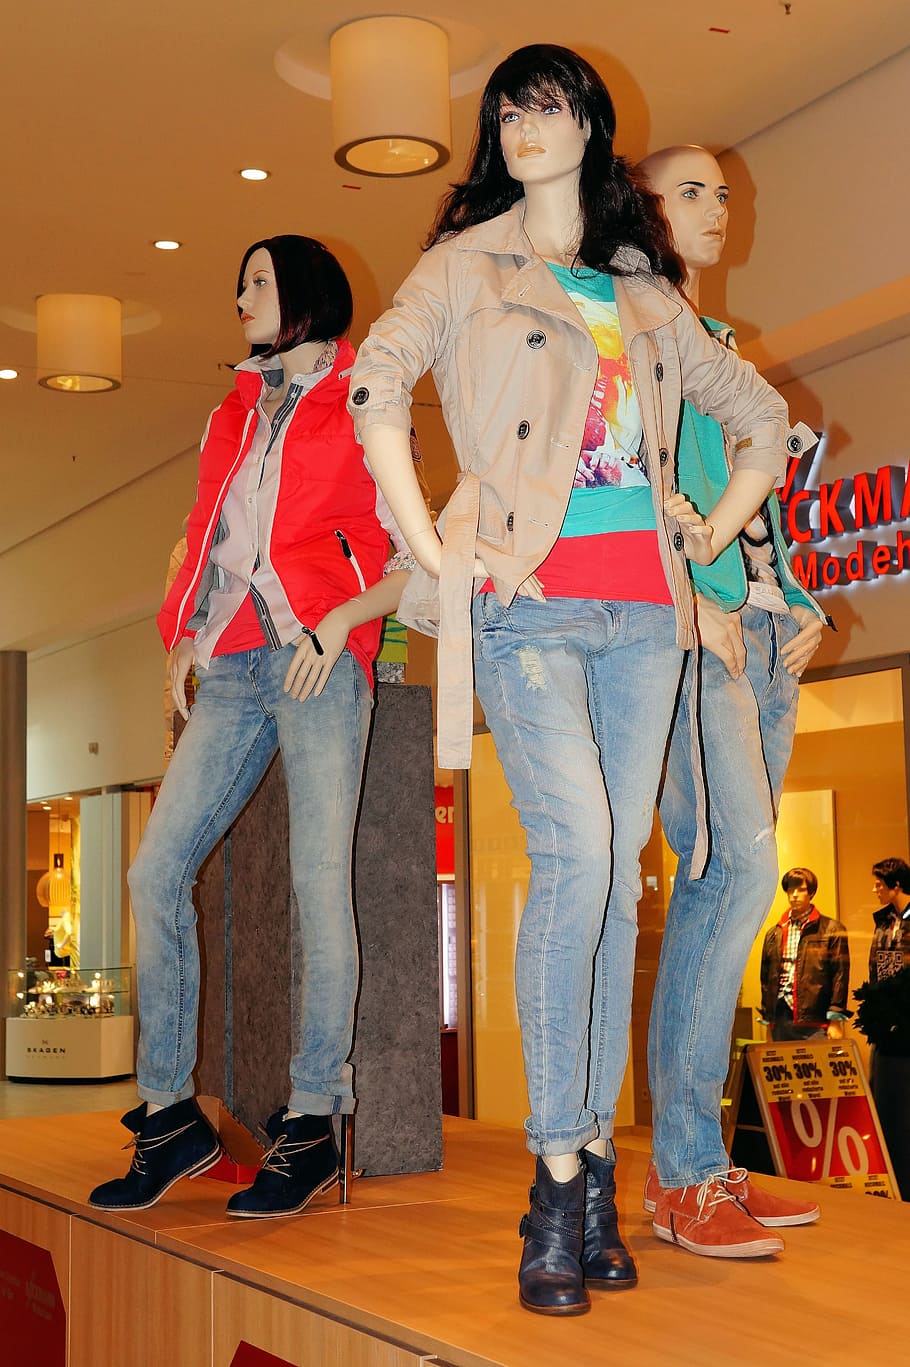 women's blue jeans, display dummy, women, dresses business, shopping, fashion, jeans, pants, clothing, fashionable